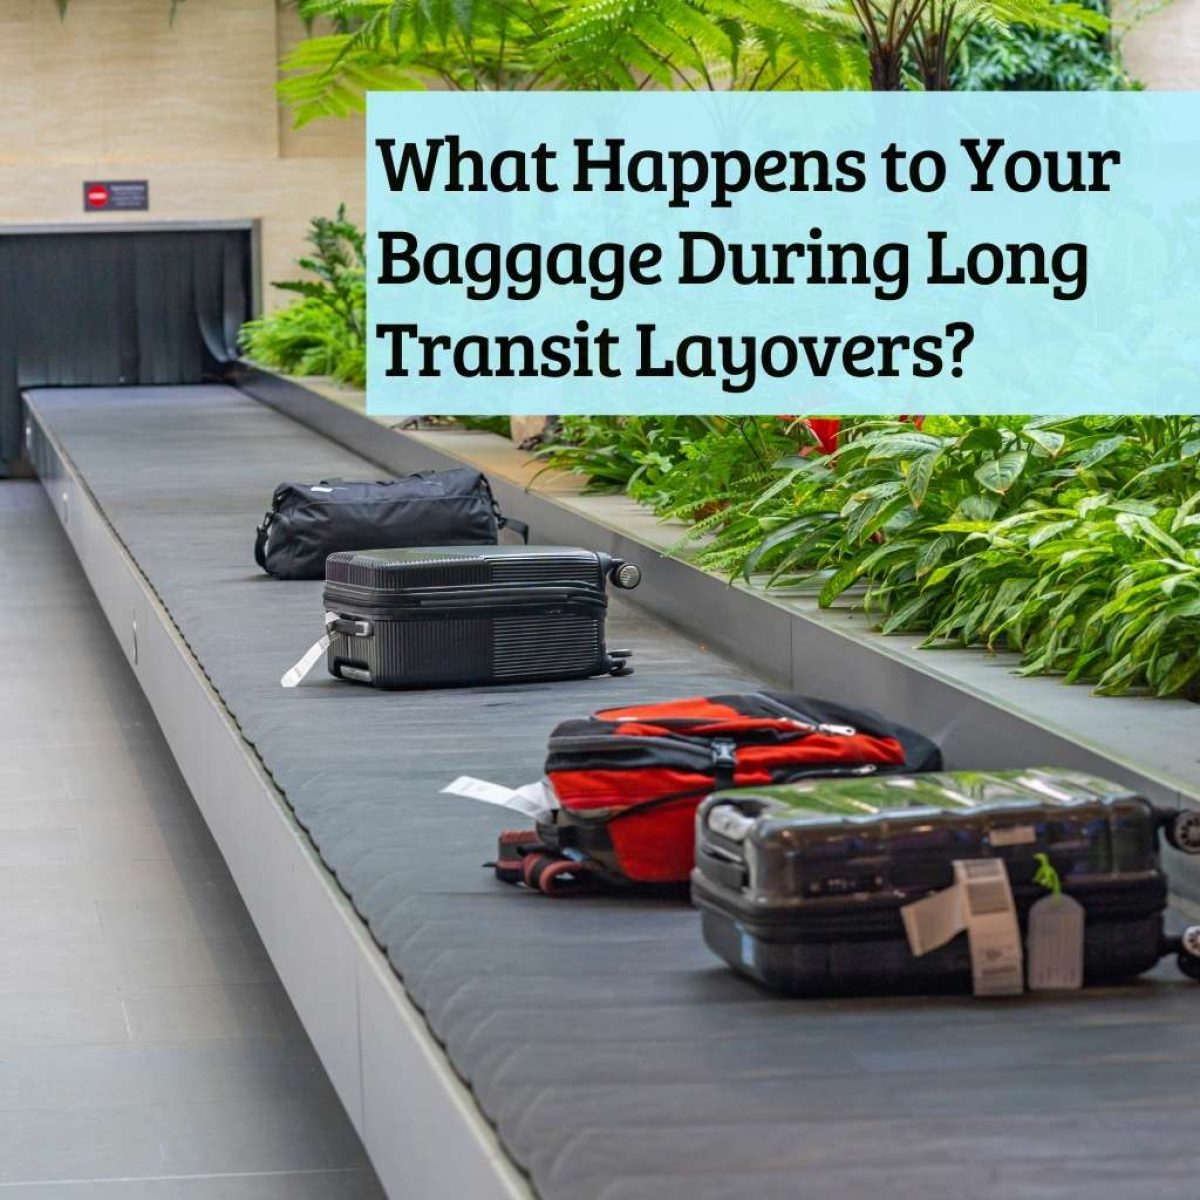 Do I need to check out luggage during layover?